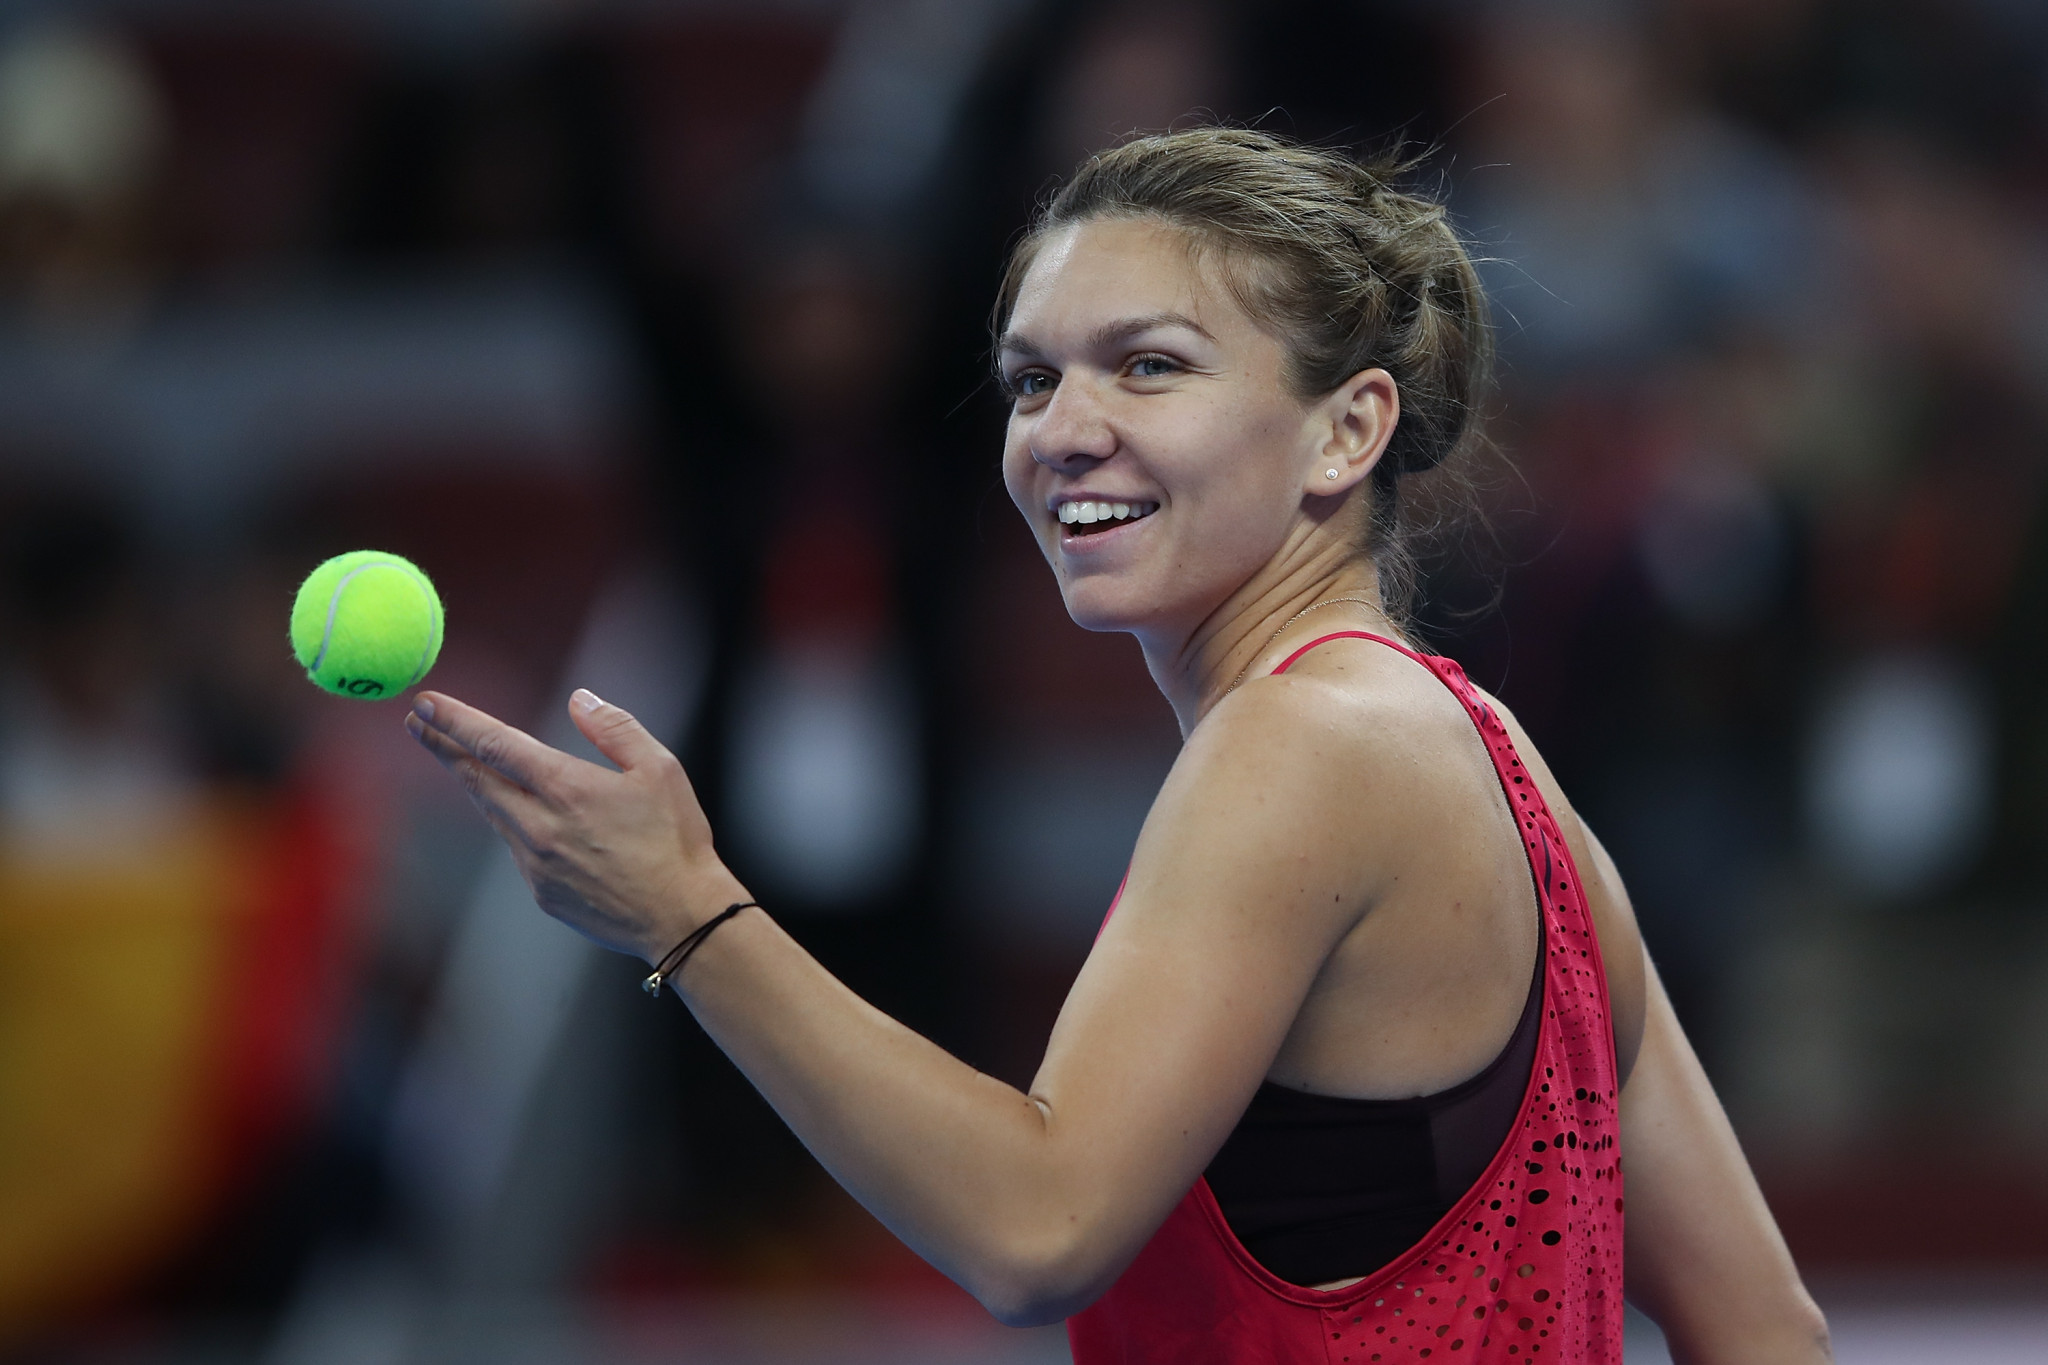 Romania’s Simona Halep has beaten Russia’s Maria Sharapova for the first time in her career to reach the quarter-finals of the China Open in Beijing ©Getty Images